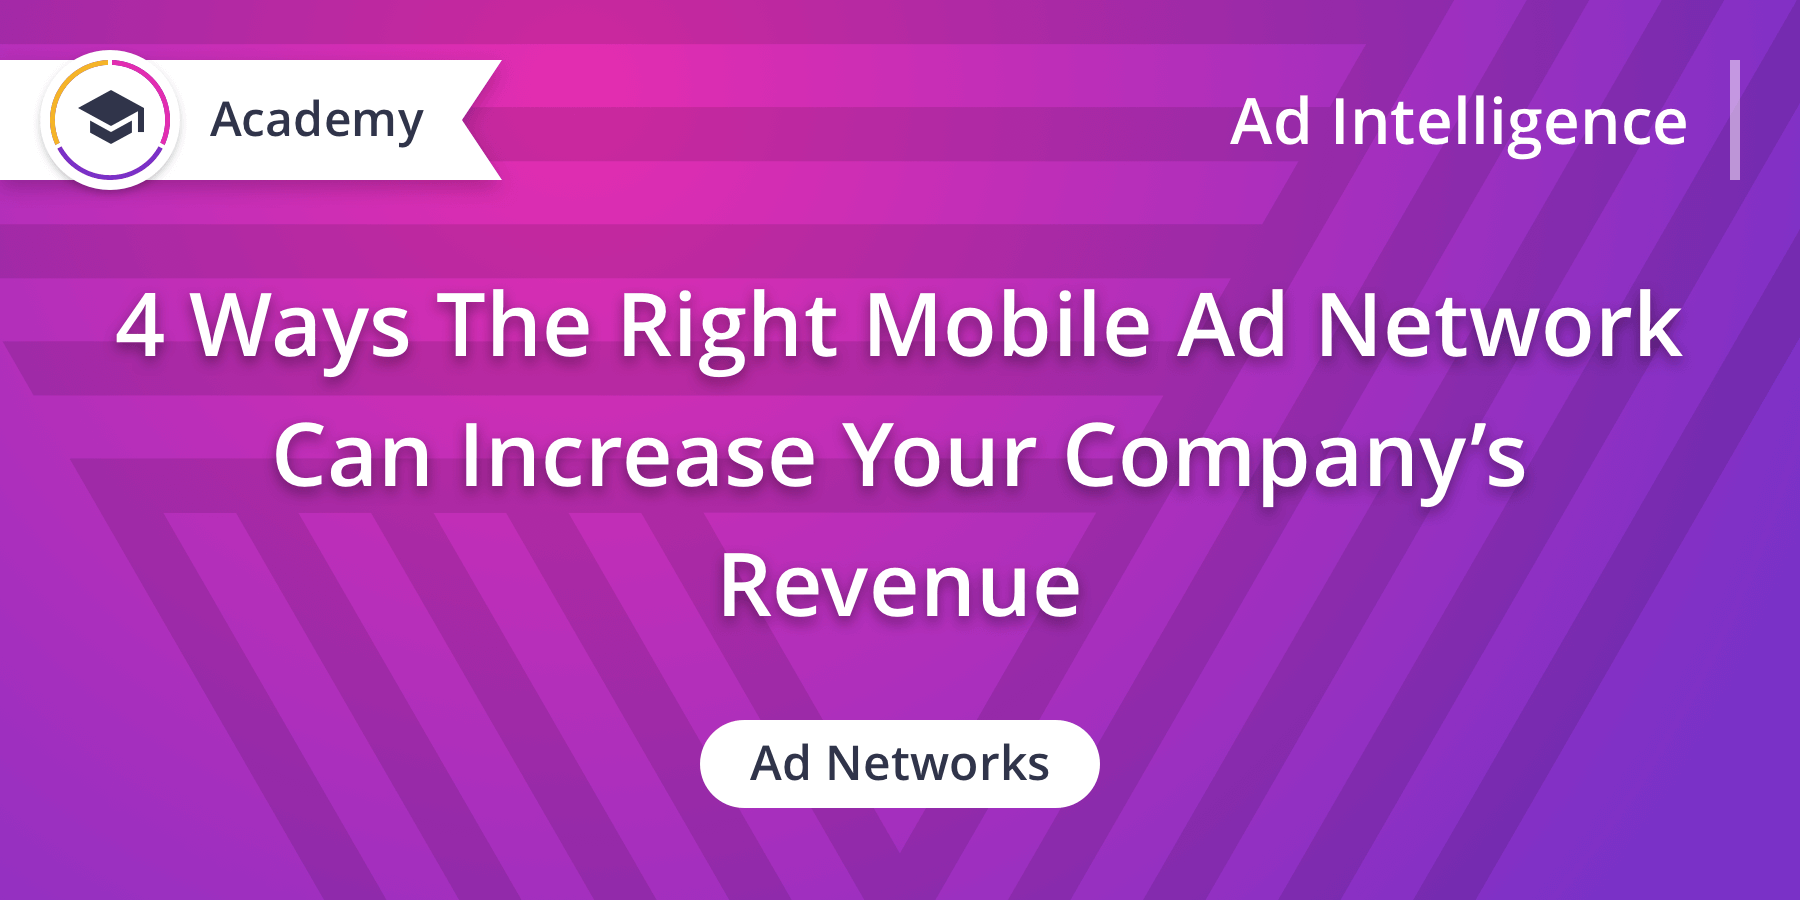 4 Ways The Right Mobile Ad Network Increases Revenue